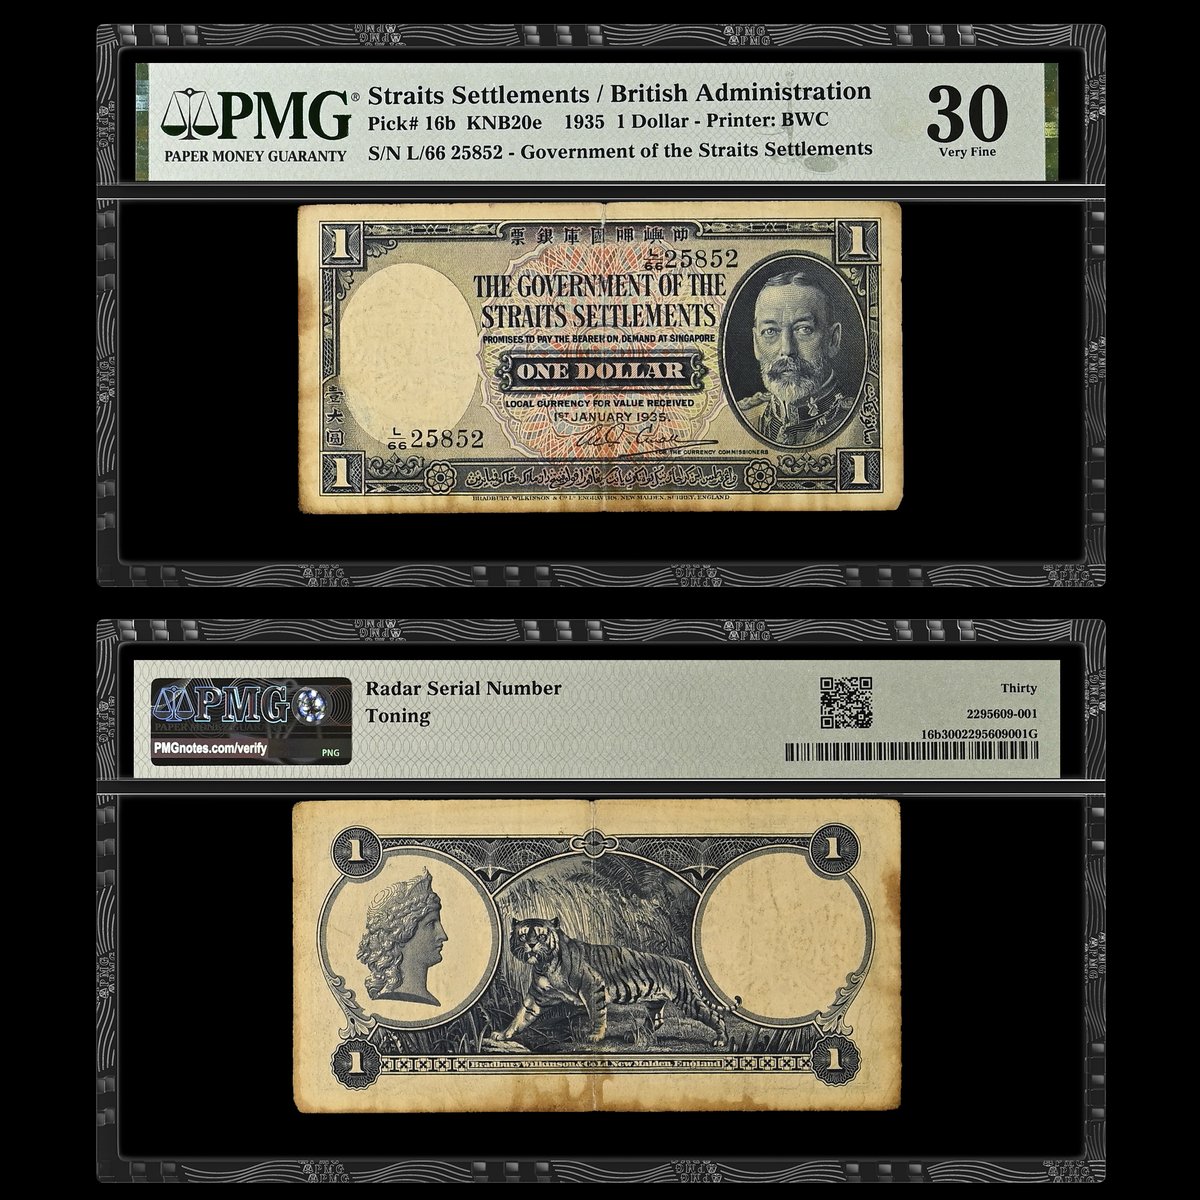 Note of the Day: Take a look at the Radar Serial Number on today’s #FancyFriday featured banknote. Graded PMG 30 Very Fine, this Straits Settlements / British Administration 1935 1 Dollar has a serial number that reads the same forward and backward.